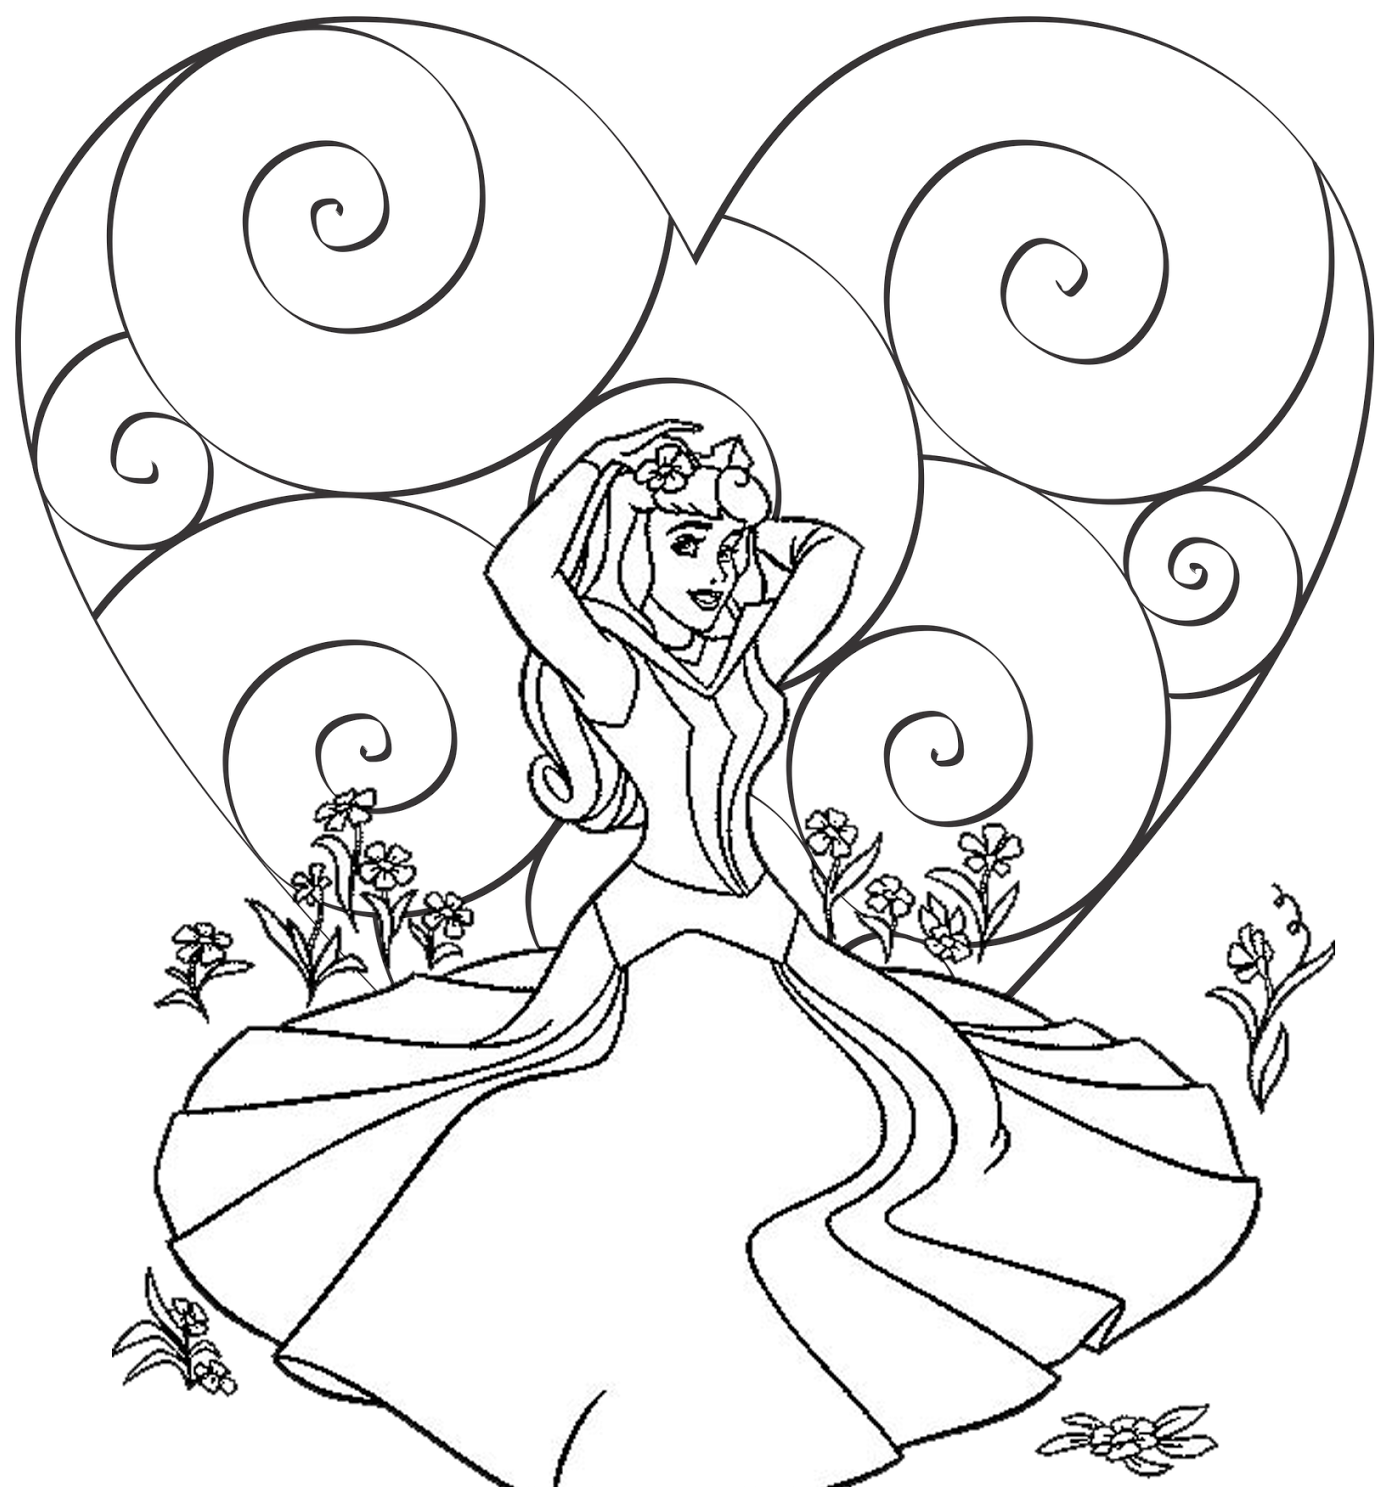 valentines-disney-coloring-pages-best-coloring-pages-for-kids